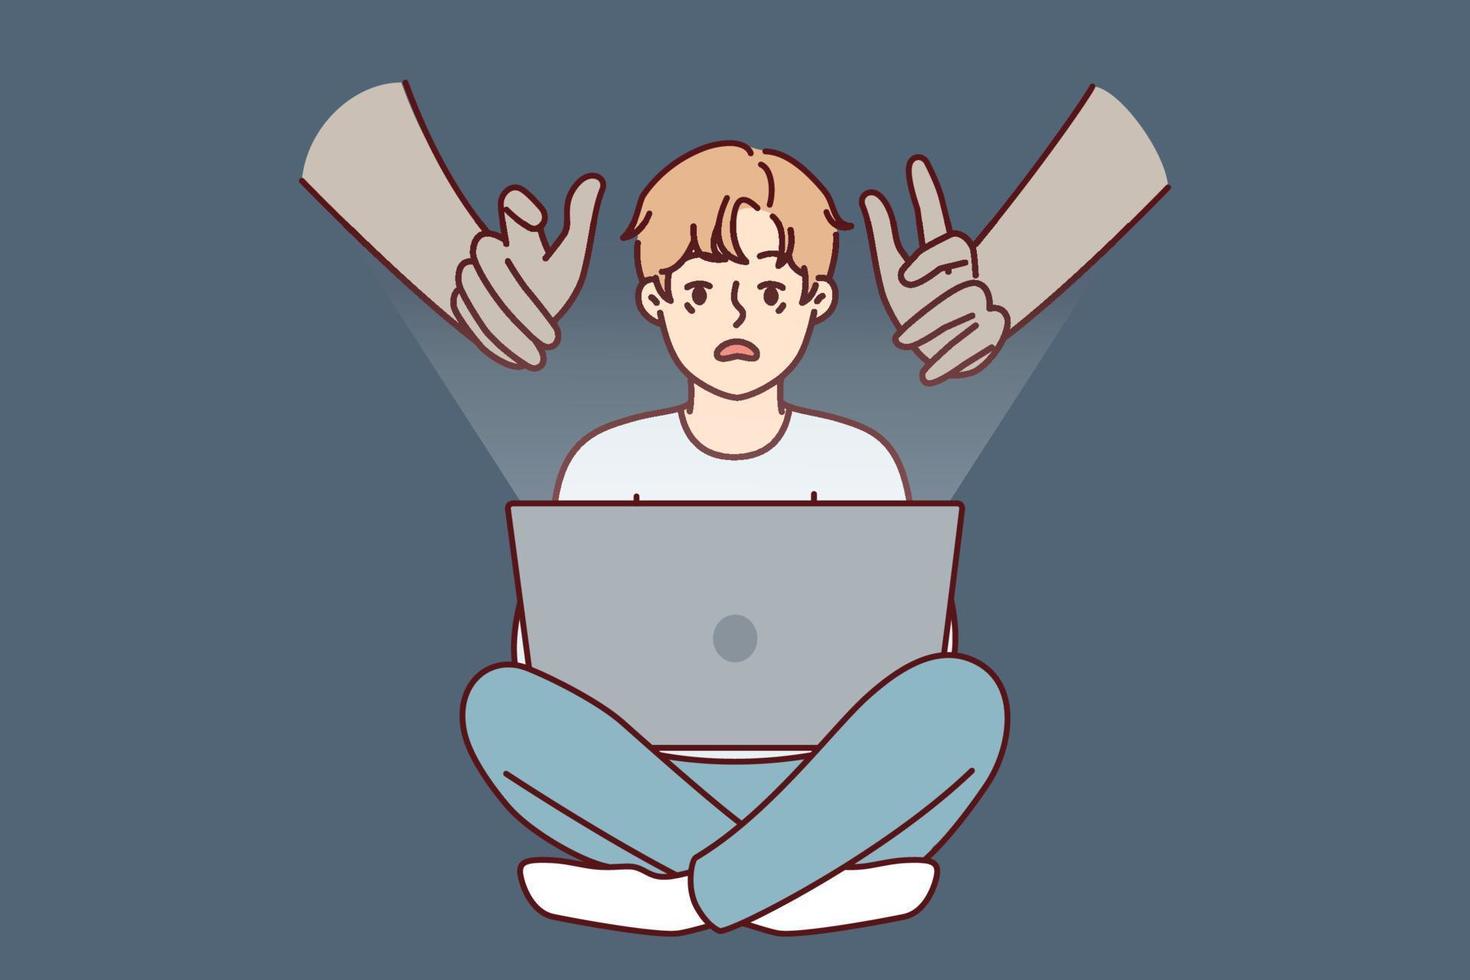 Giant hands reaching out to teenage boy using laptop with internet without parental control. concept of danger of using gadgets by children due to possibility of identity theft. Flat vector image